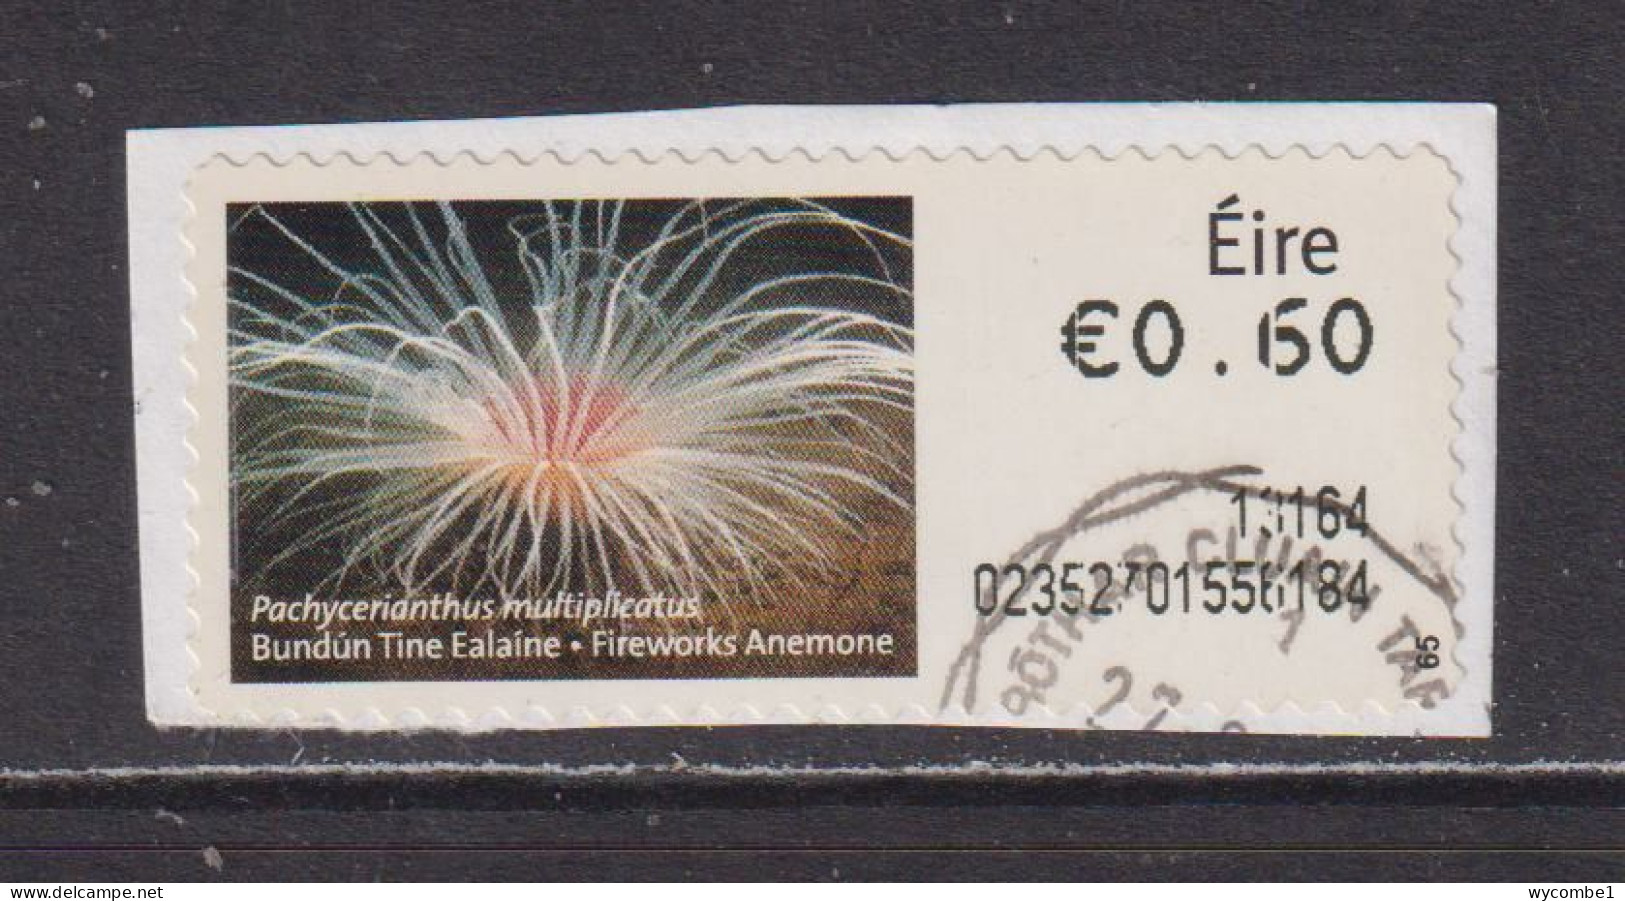 IRELAND  -  2012 Fireworks Anemone SOAR (Stamp On A Roll)  CDS  Used On Piece As Scan - Gebraucht